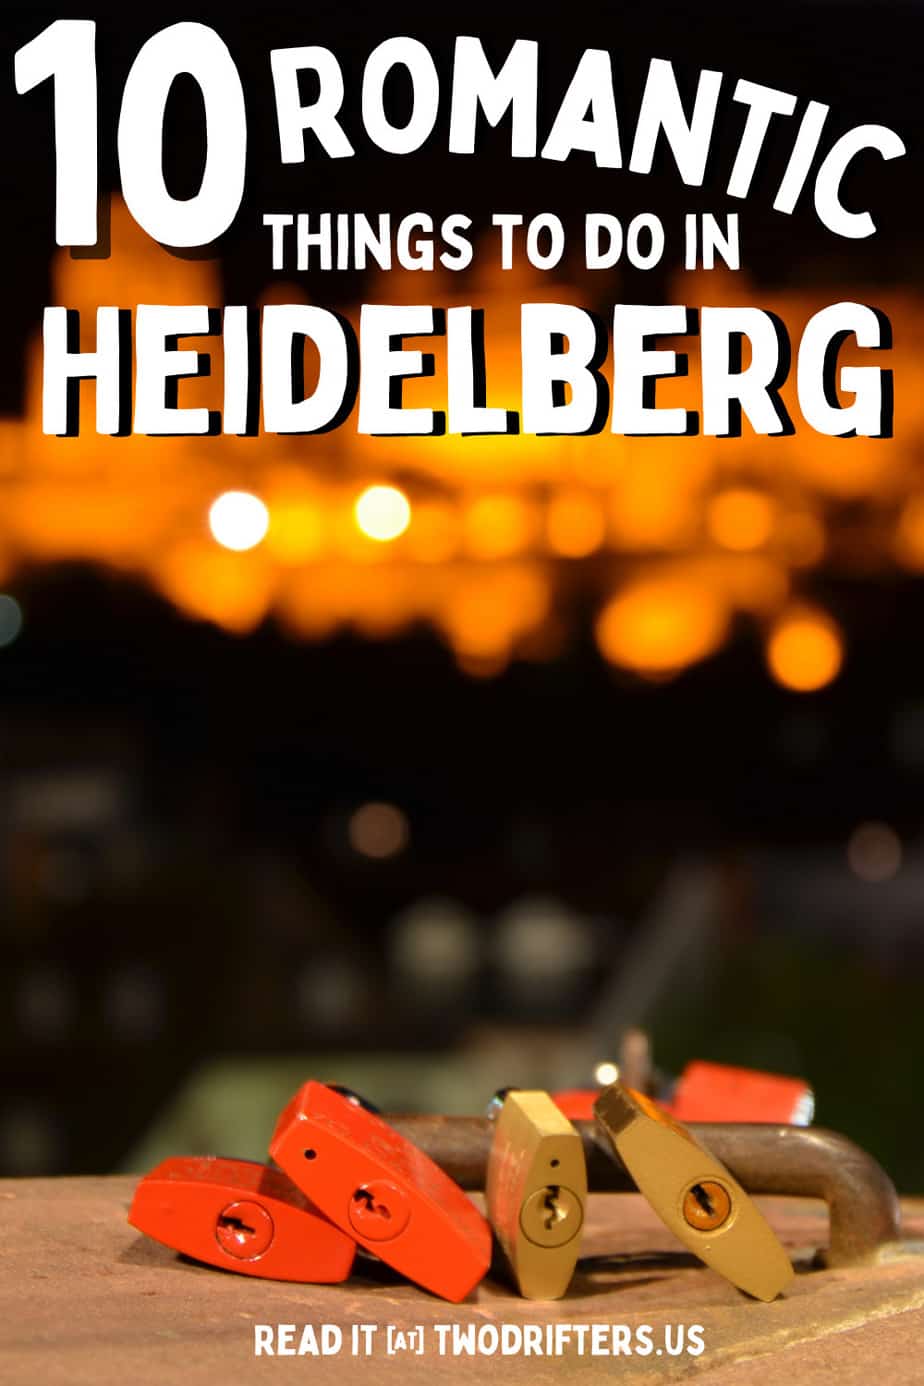 Pinterest social image that says “10 romantic things to do in Heidelberg.”